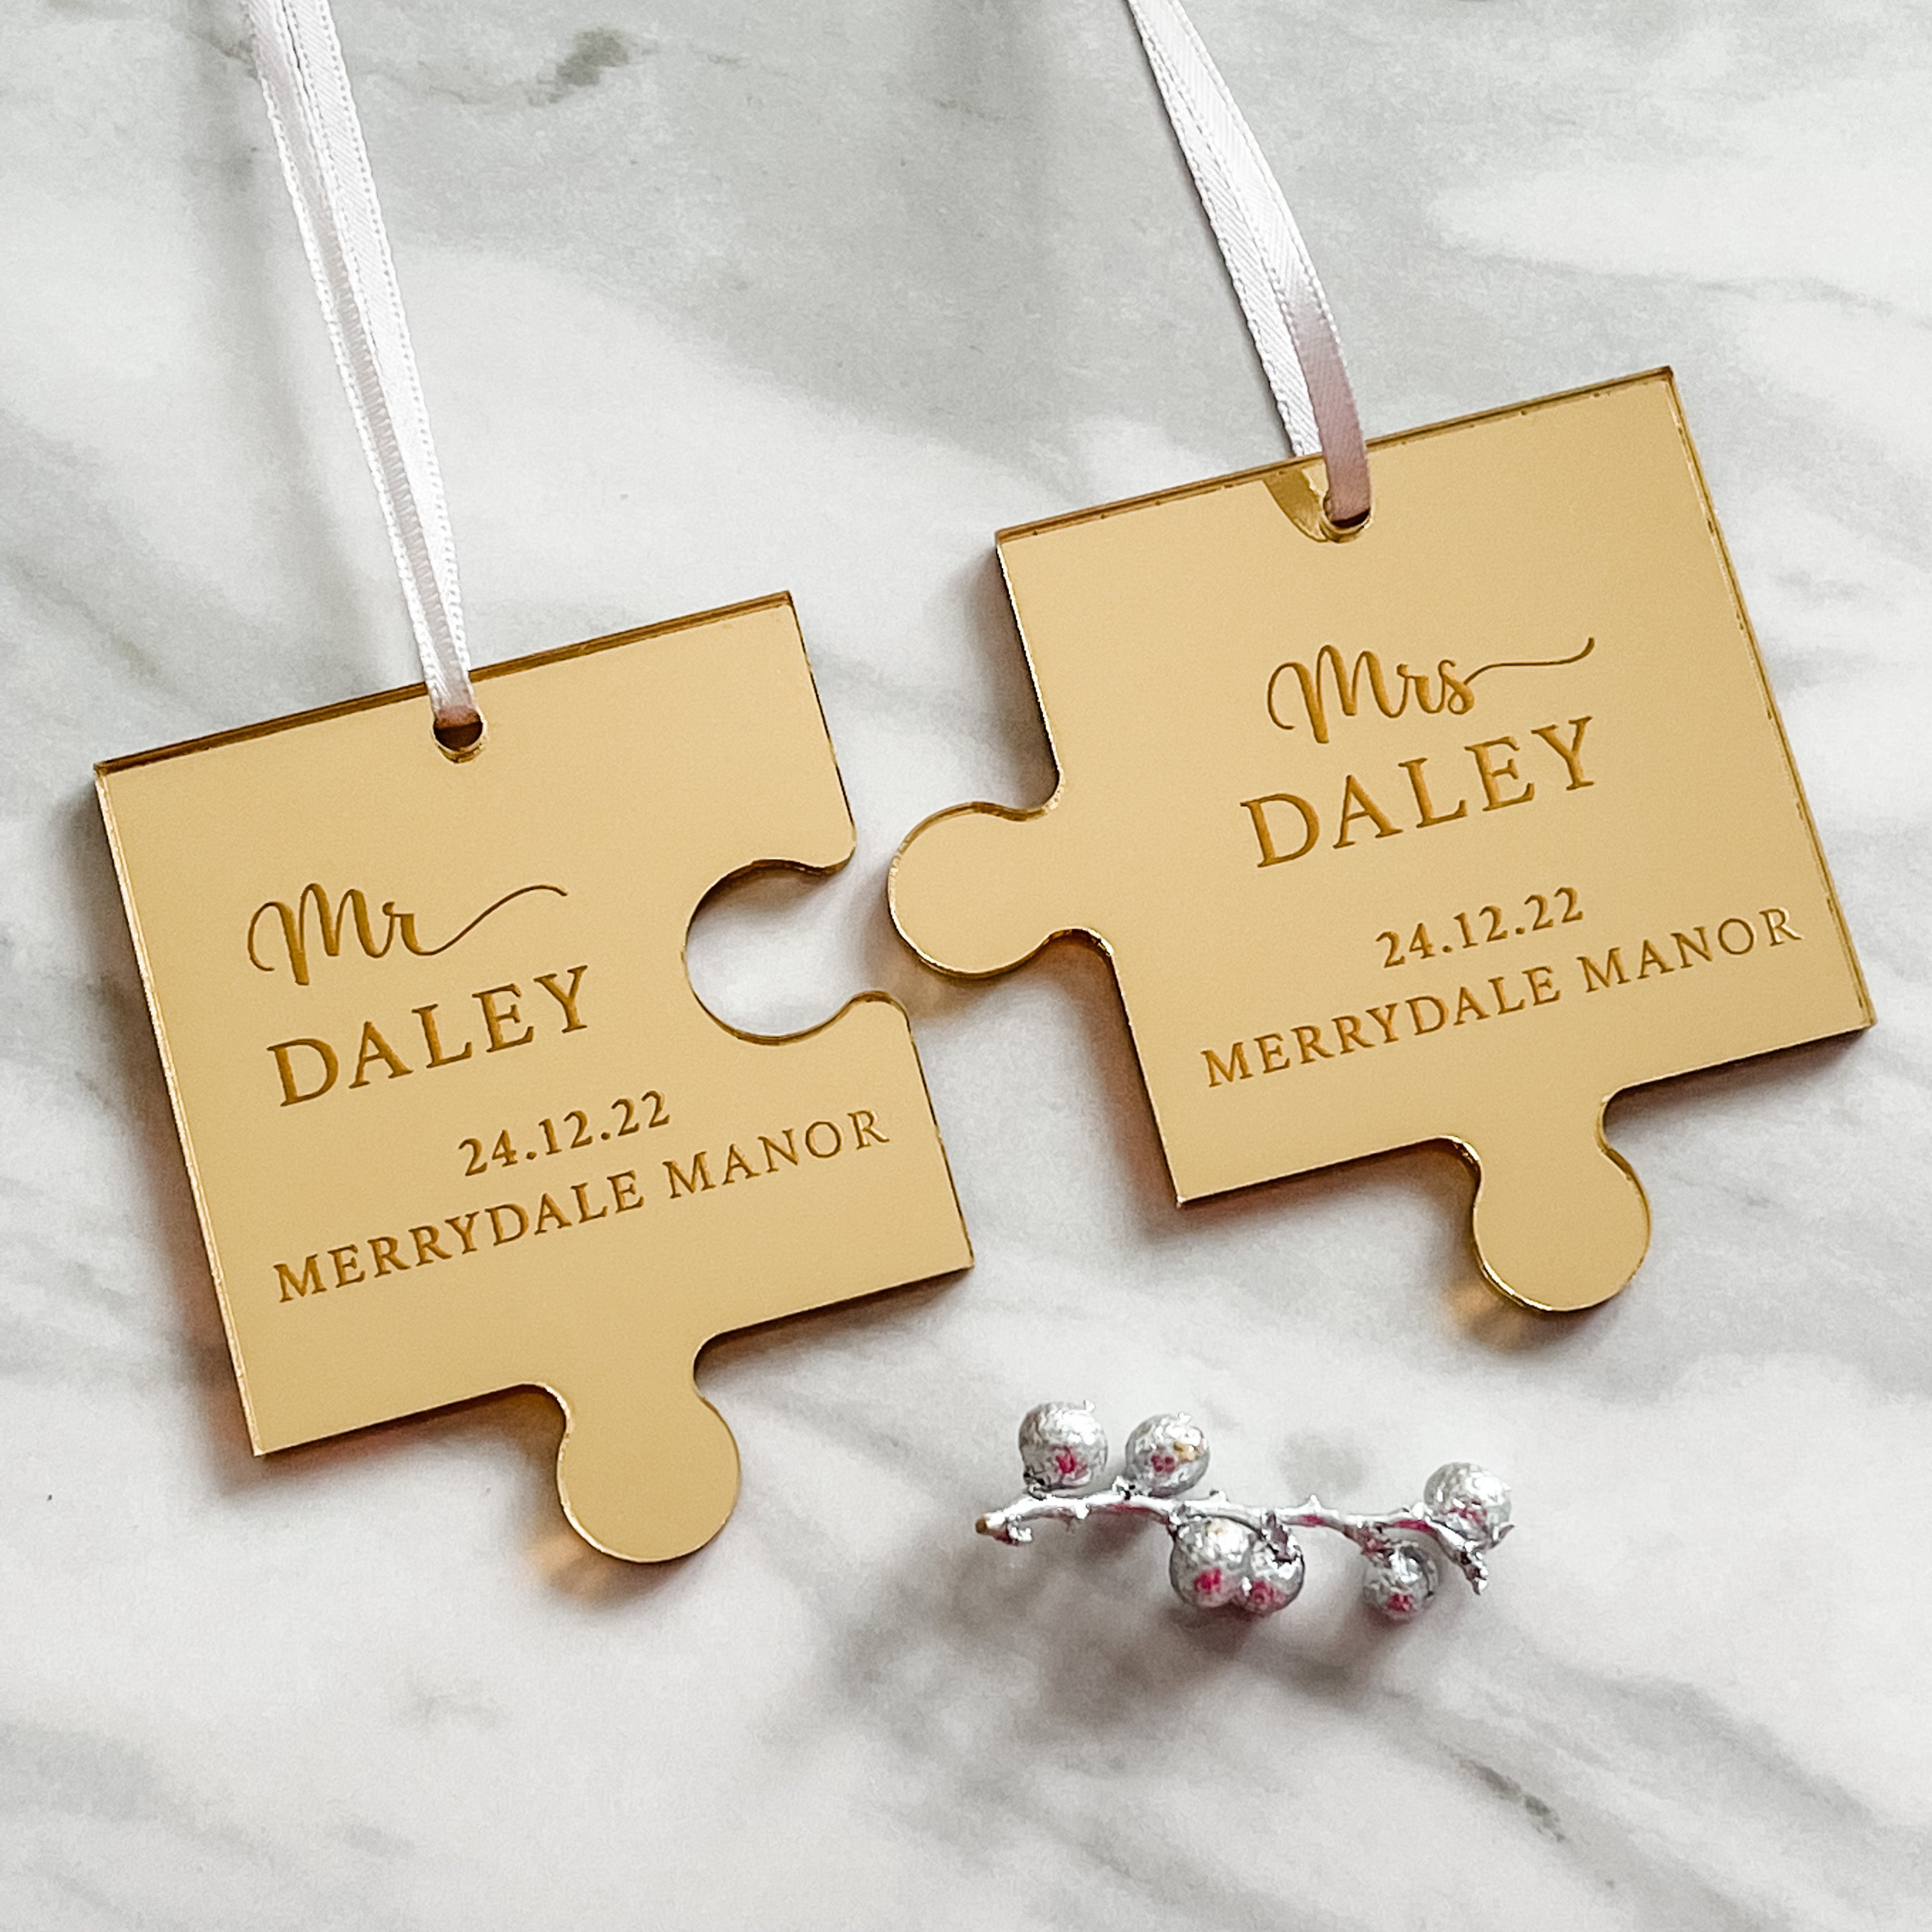 Married Couples Luxury Tree Decorations